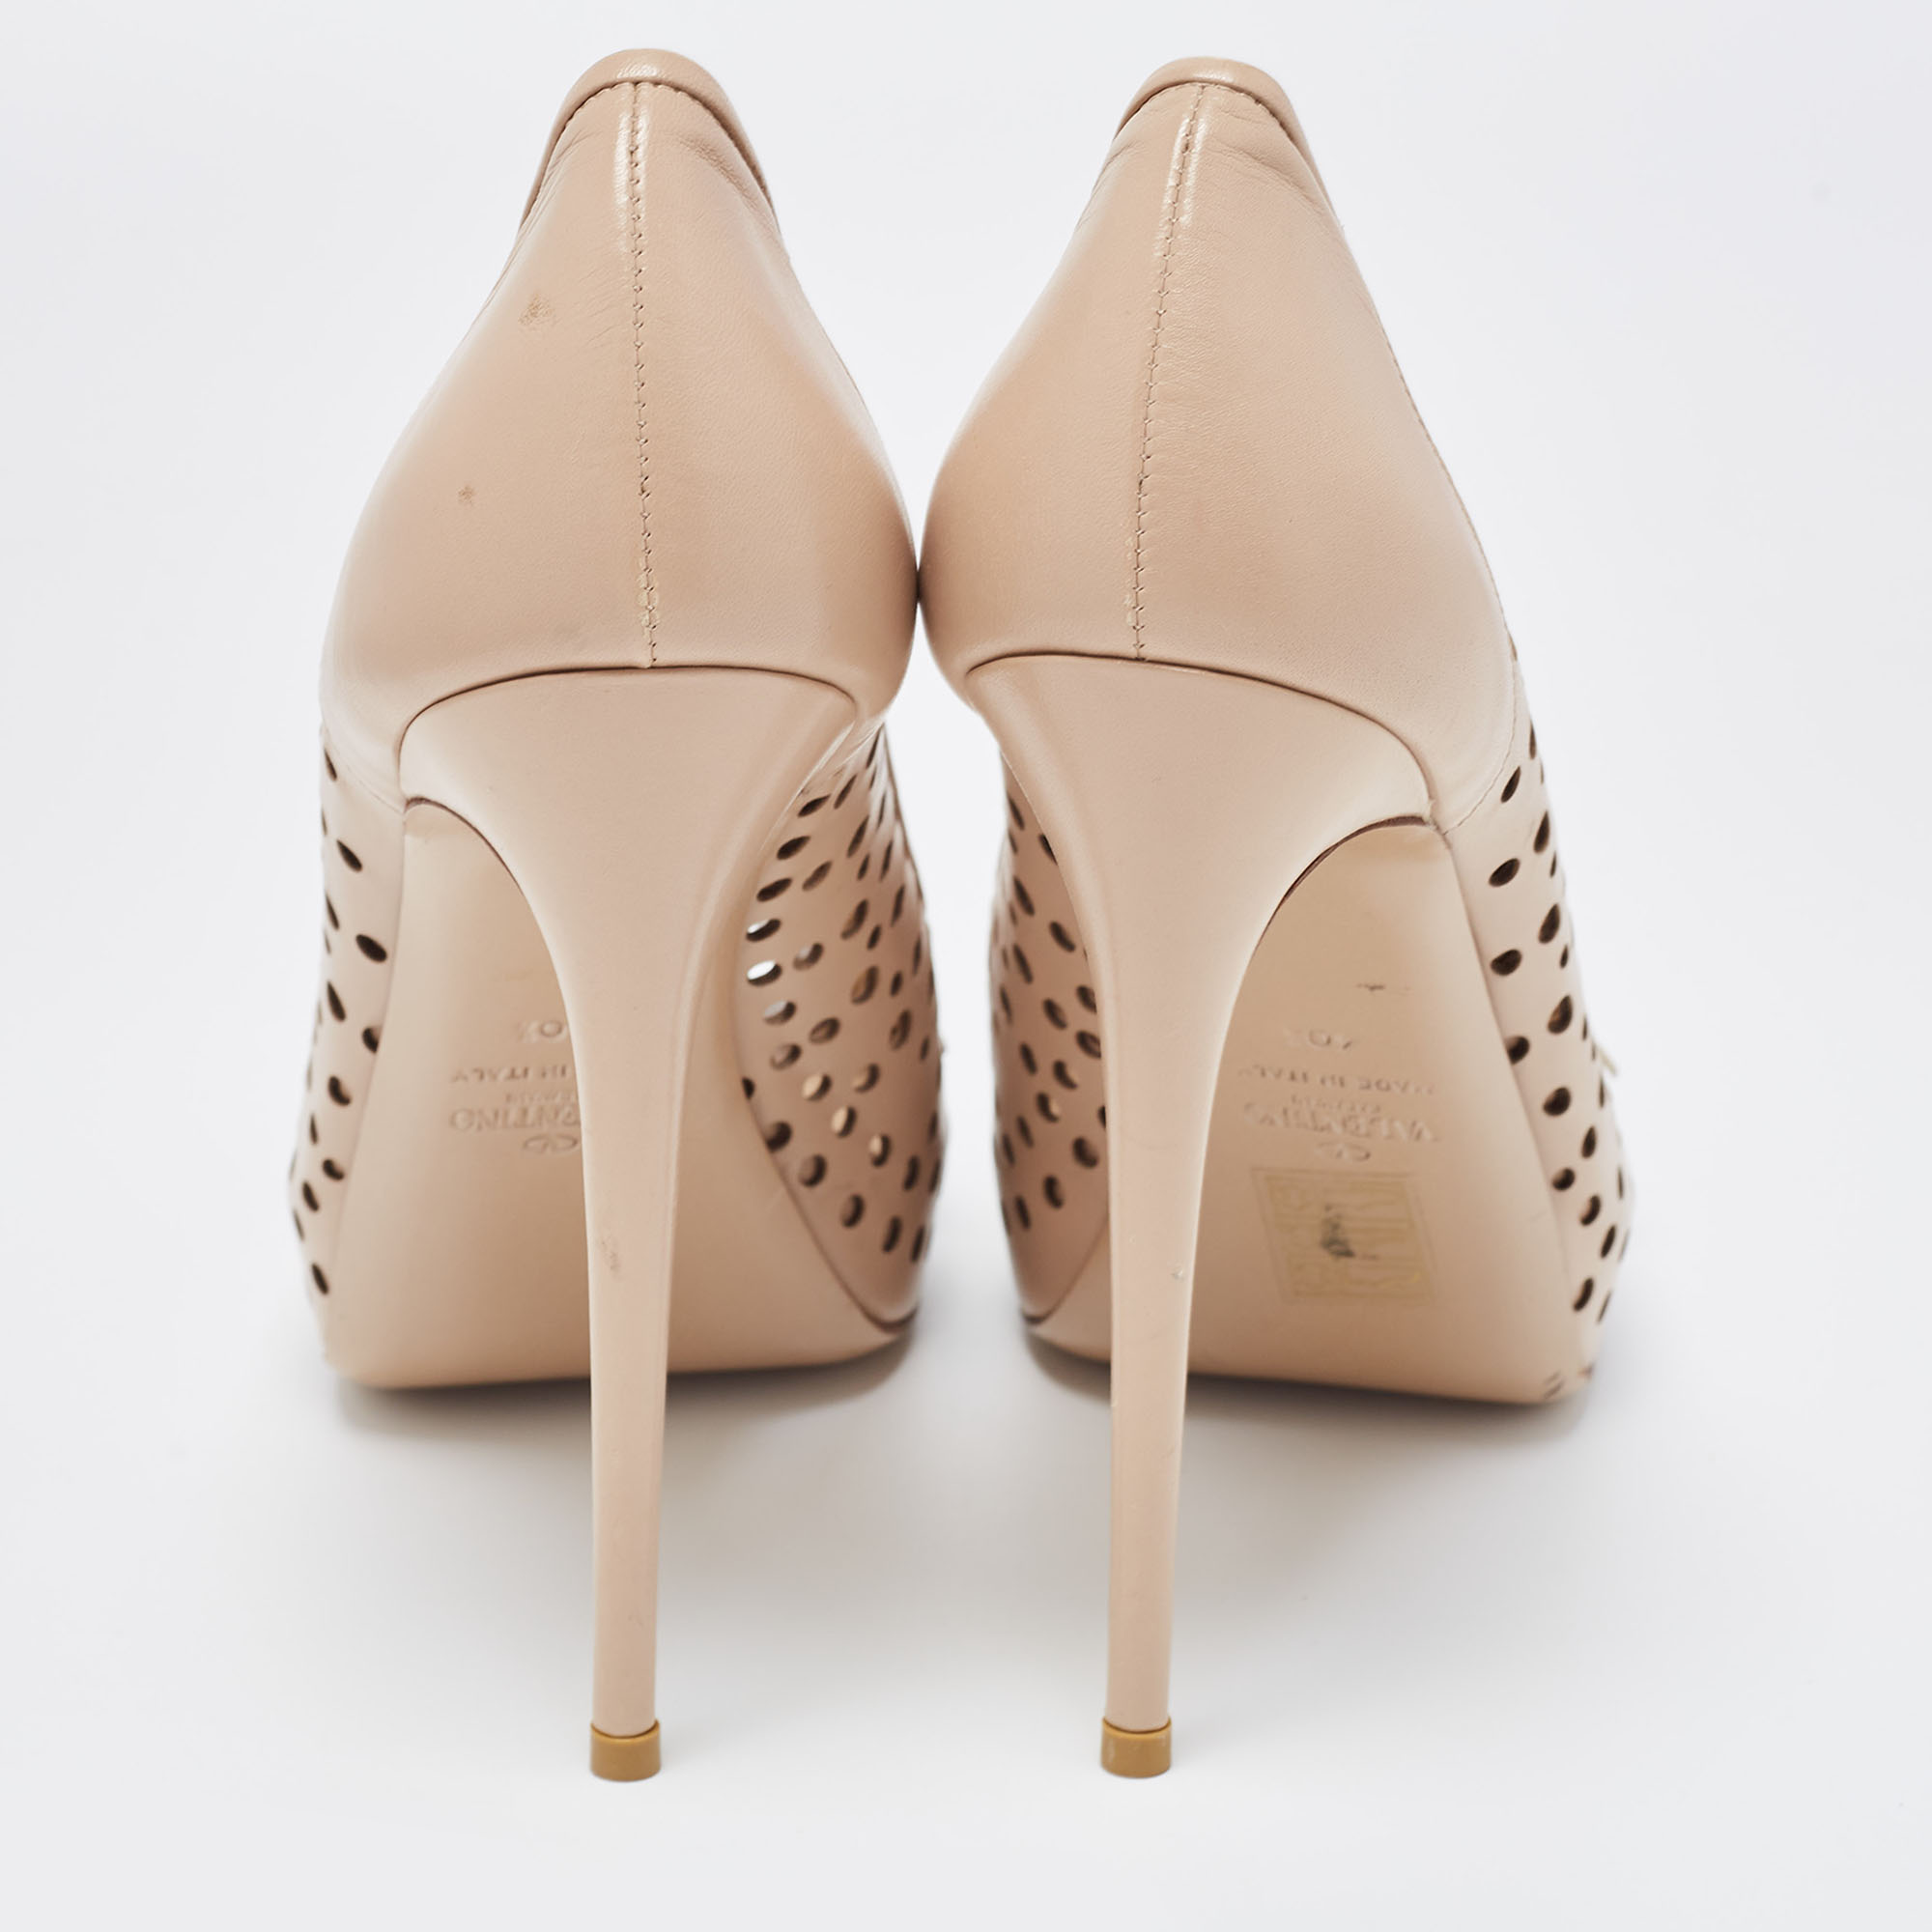 Valentino Beige Perforated Leather Floral Applique Peep Toe Pumps Size 40.5